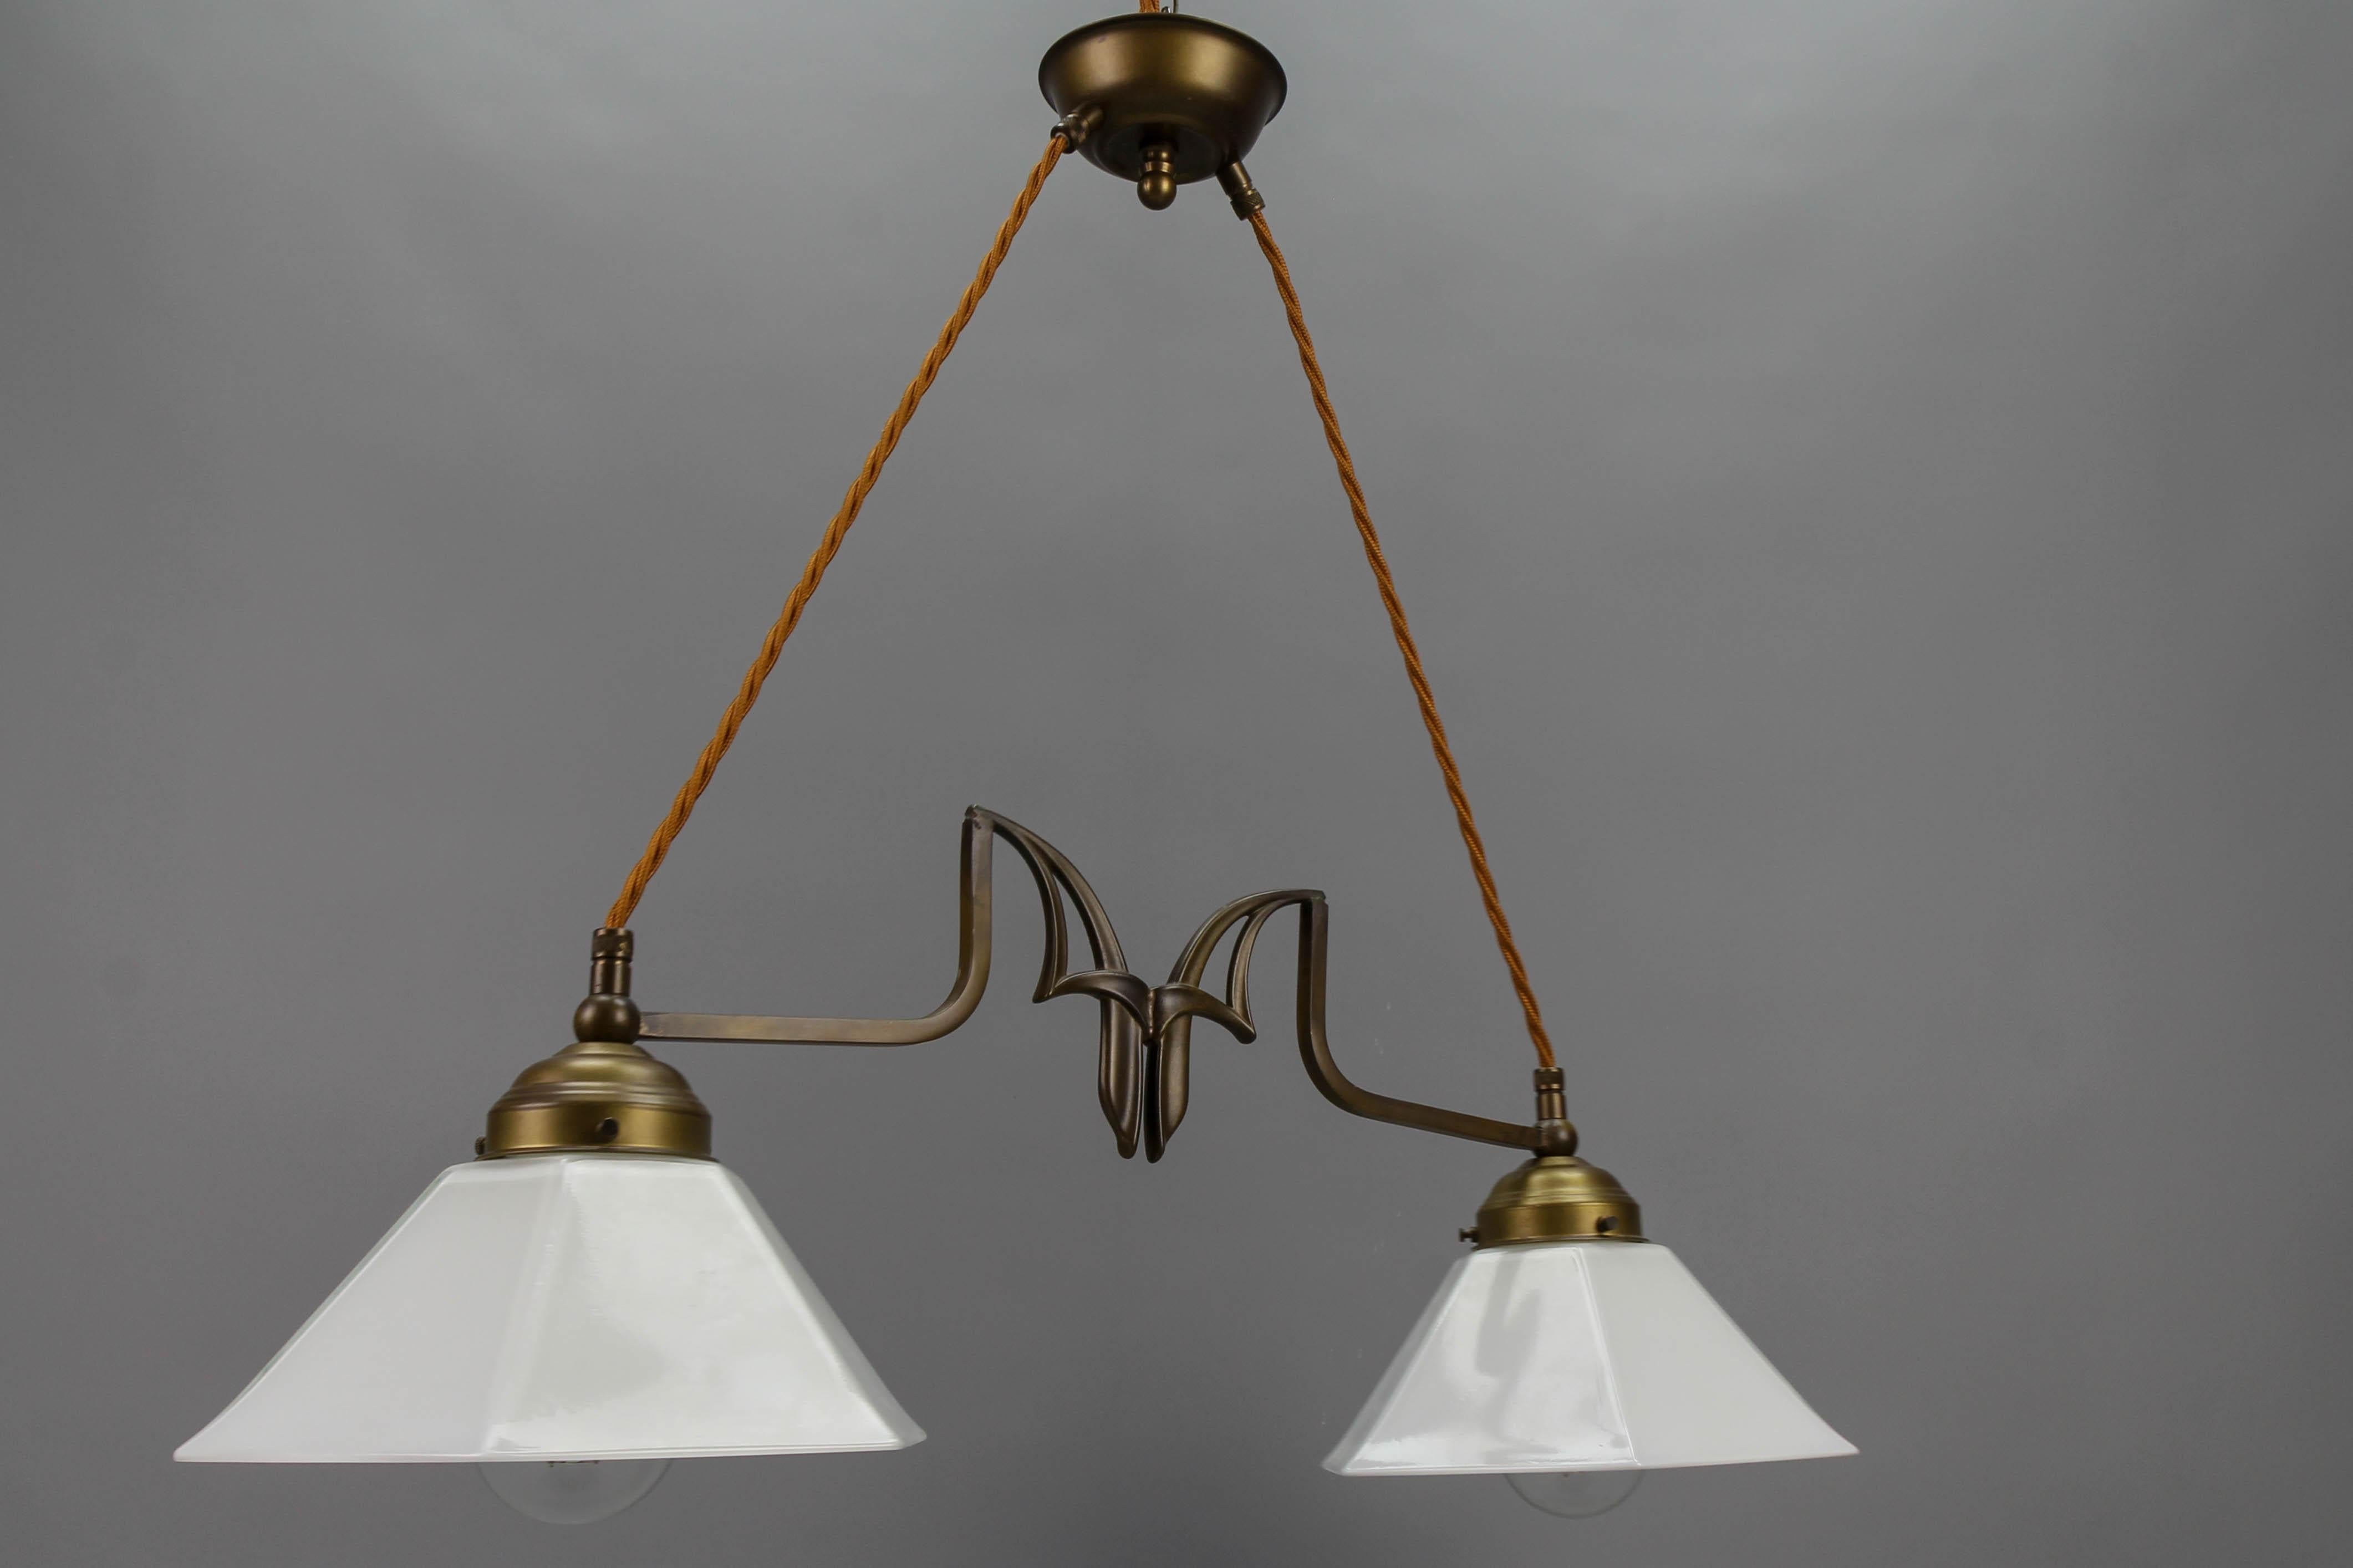 Mid-20th Century Art Nouveau Style Brass and White Glass Two-Light Pendant Chandelier For Sale